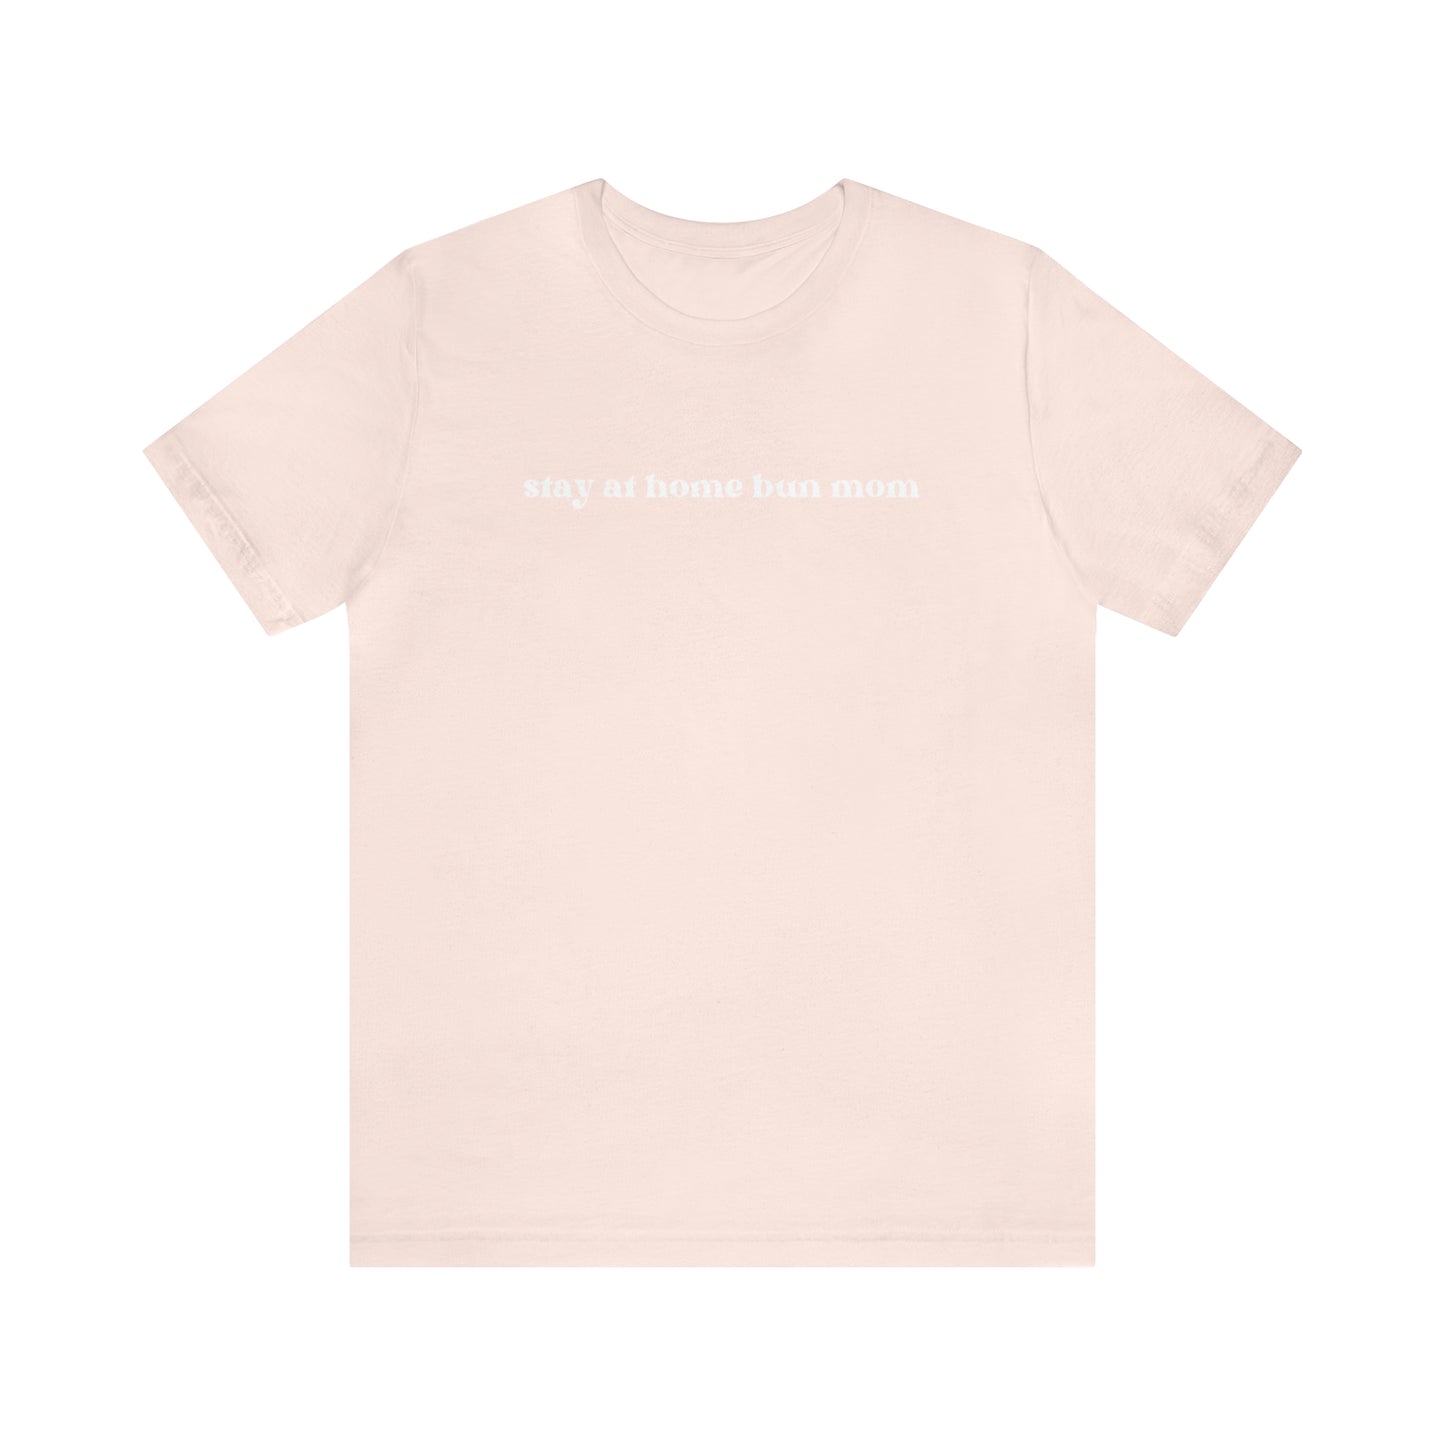 Stay At Home Bunmom Tee